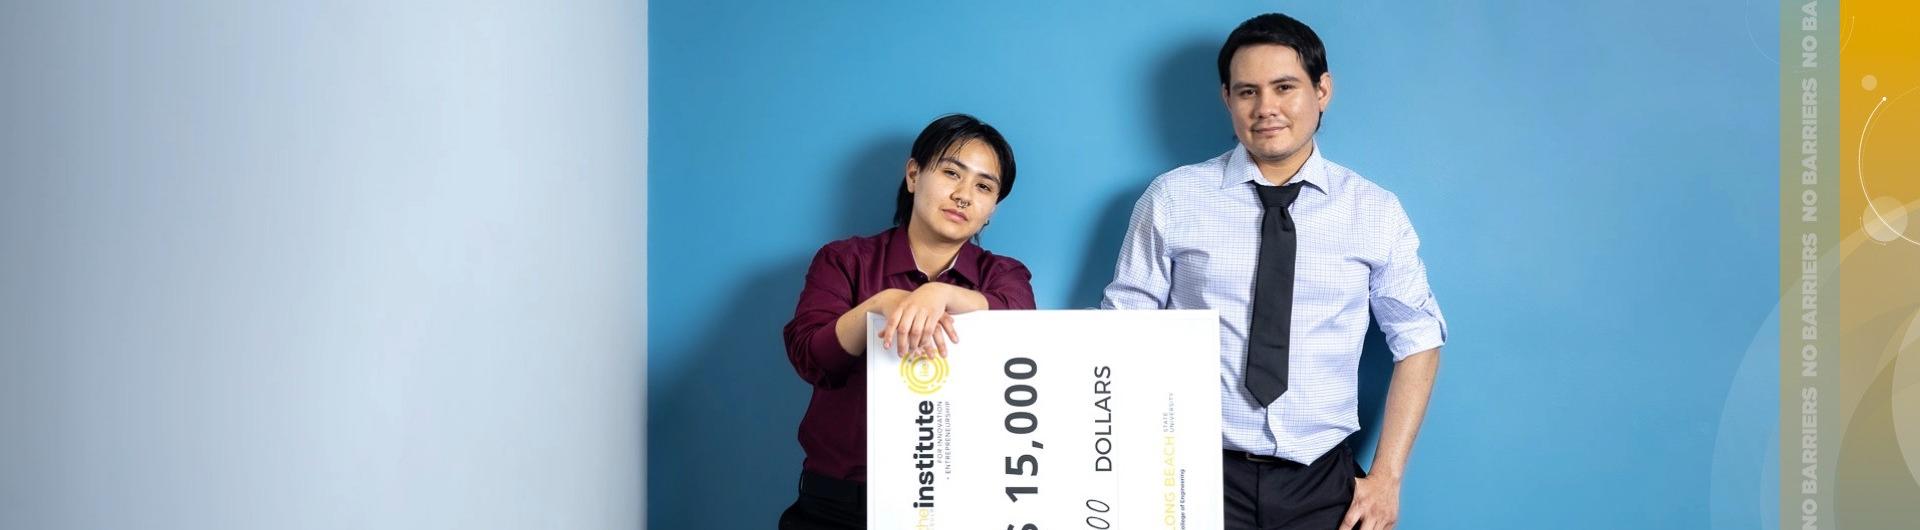 Sunstone Innovation Challenge Winners with Extra-Large $15,000 Check